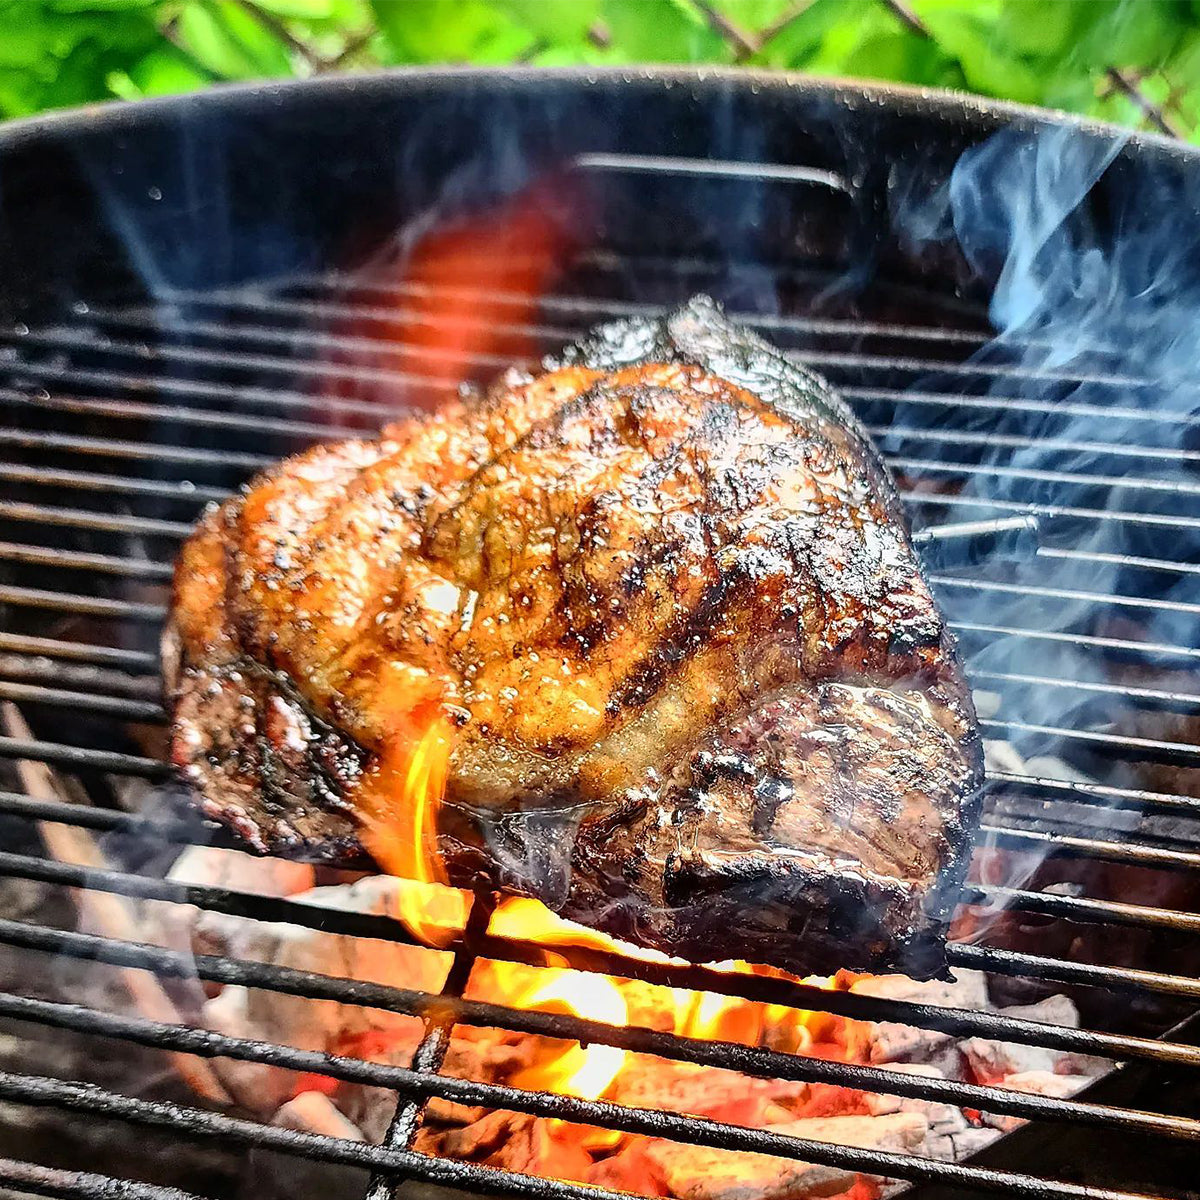 Smart Grill vs. Wireless Meat Thermometer: What's the Difference?